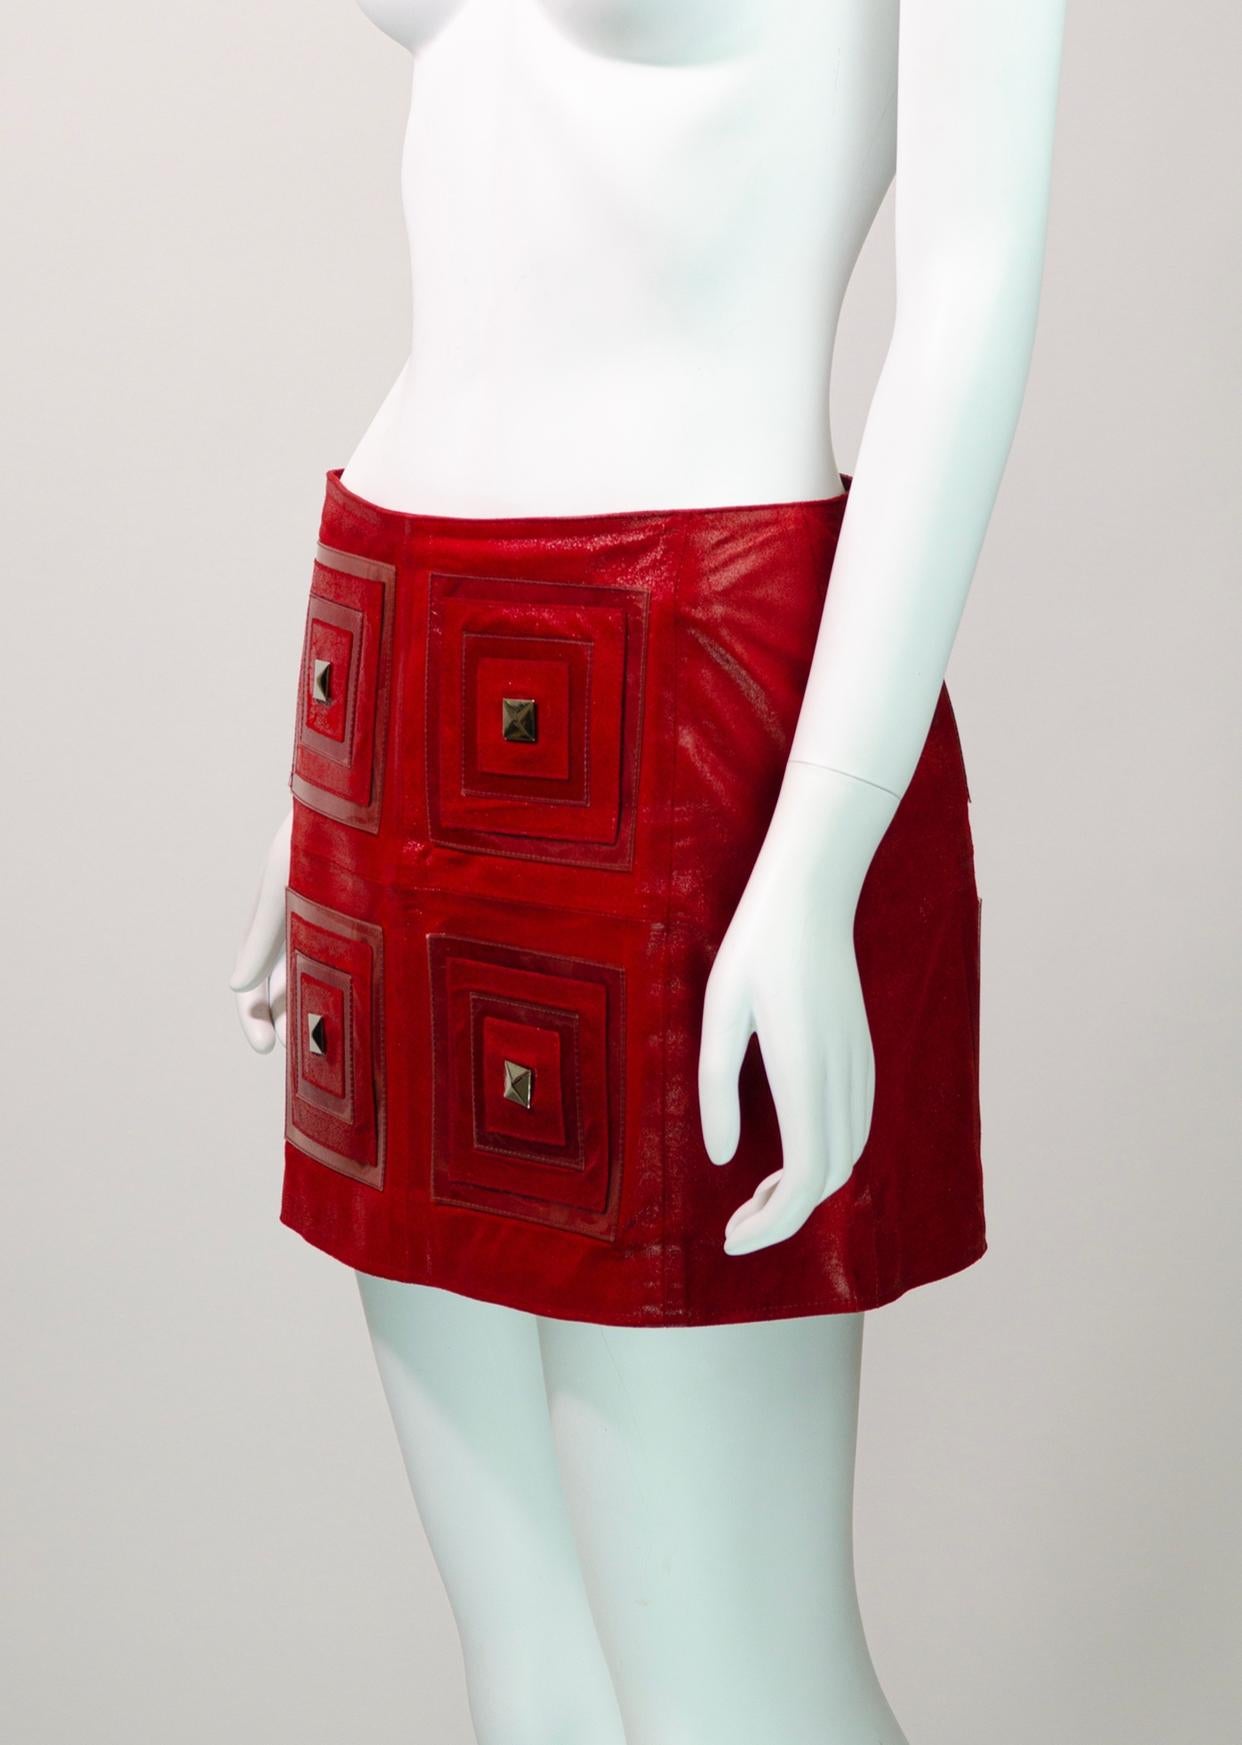 Beautiful rare vintage Paco Rabanne skirt from his Spring Summer 2002 collection.

Made from a soft red leather, this unique mini skirt features four squares at the front and back that are embellished with silver studs and and clear plastic